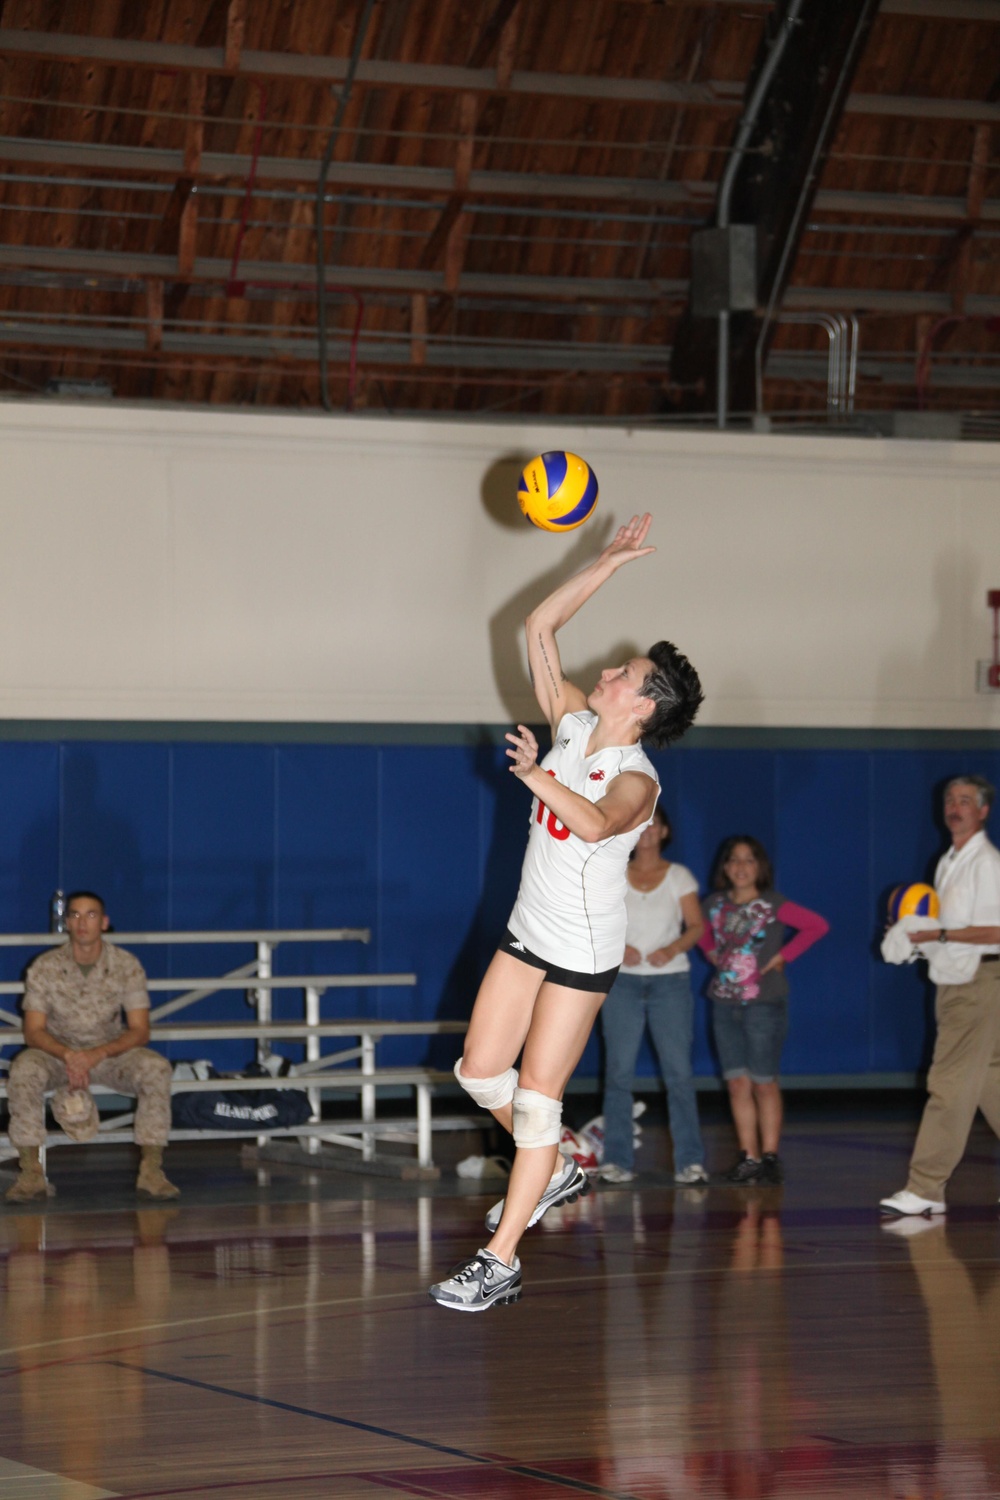 Armed forces volleyball produces fast-paced competition at annual tournament